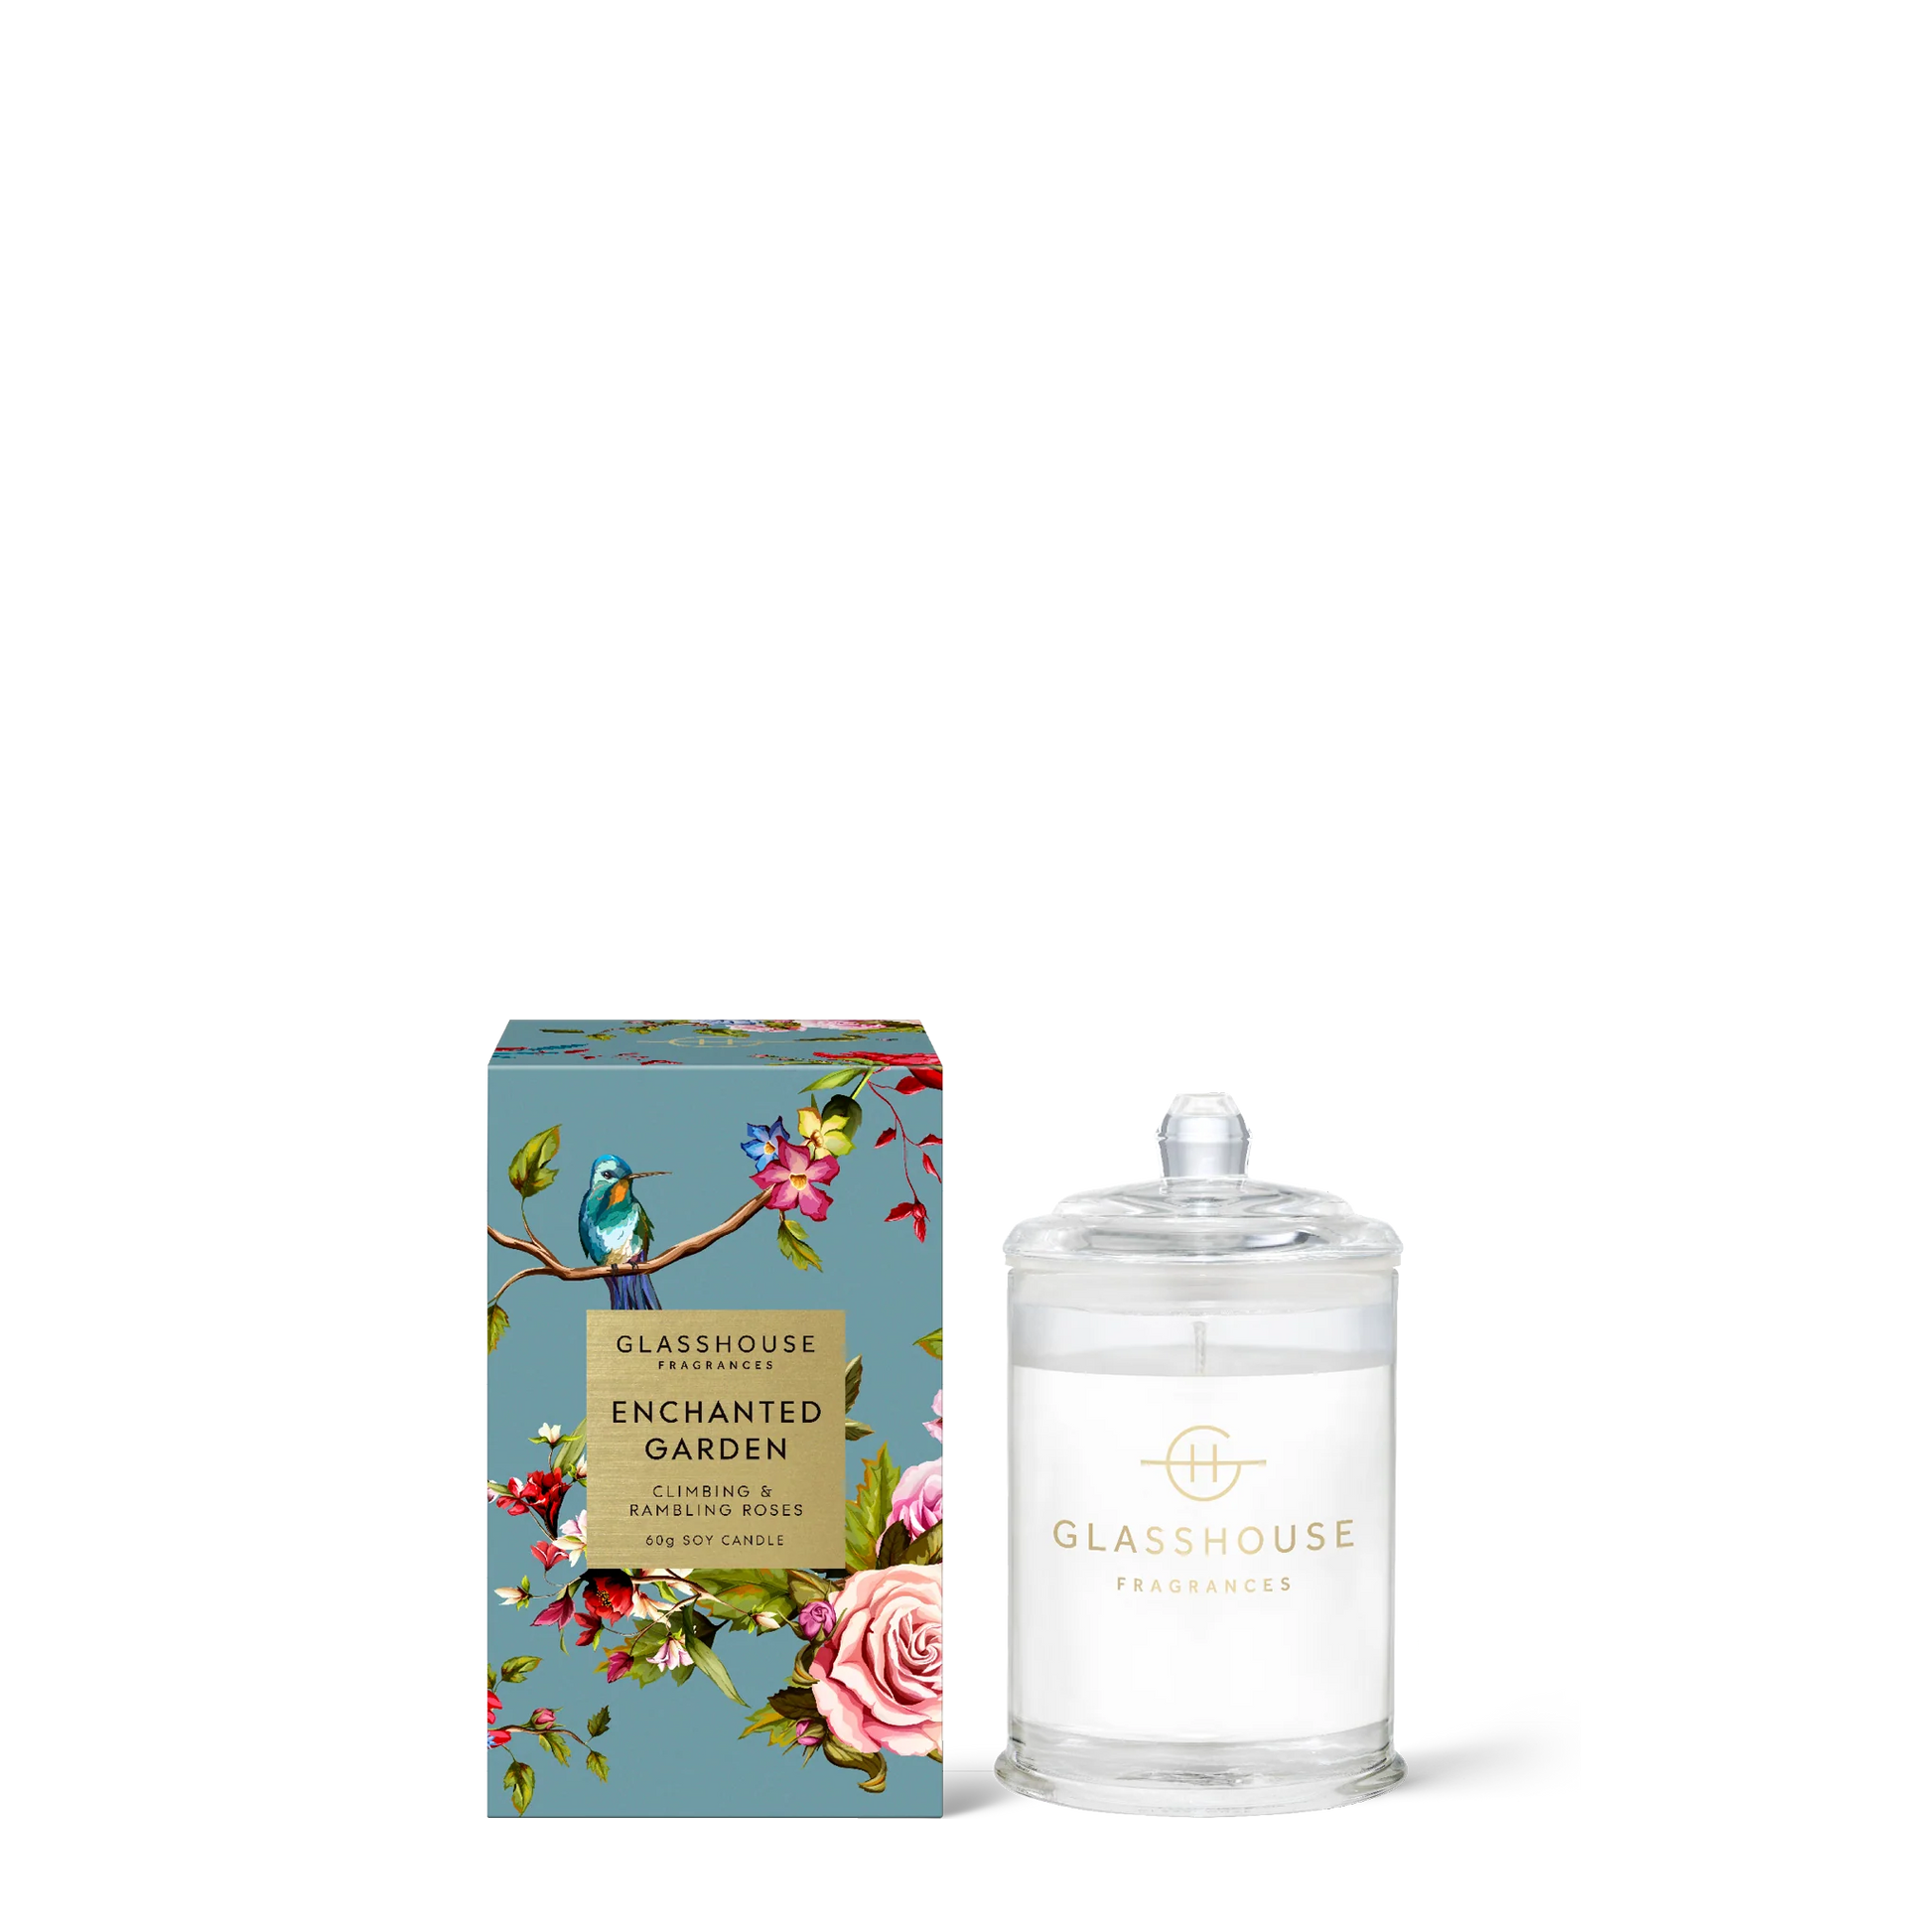 Glasshouse Fragrances Enchanted Garden Small Candle set next to its box packaging.